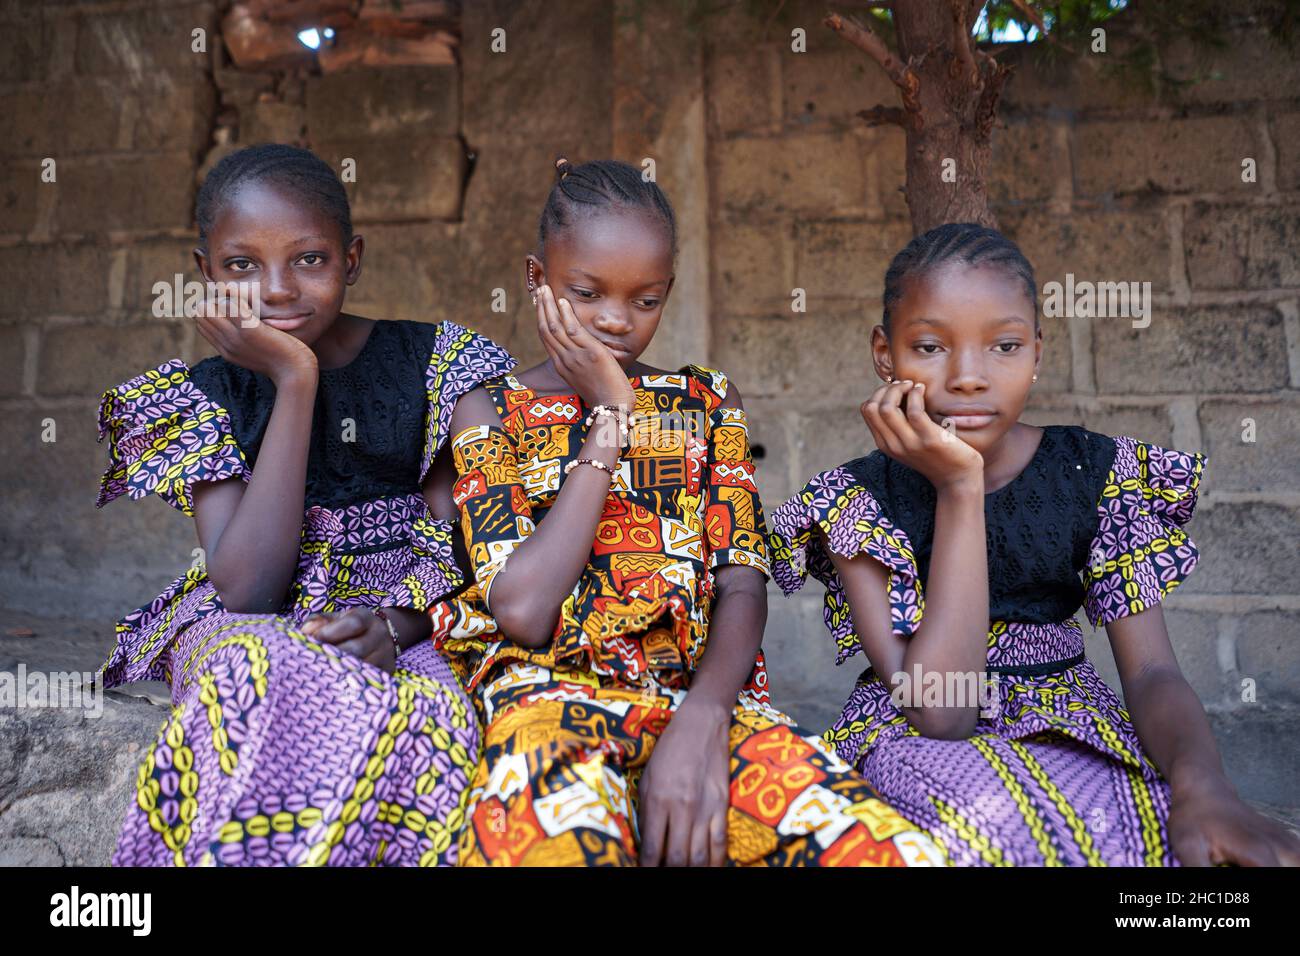 Three beautiful young welldressed black African girls sitting side by side in front of a wall with stern expressions on their faces, patiently waiting Stock Photo